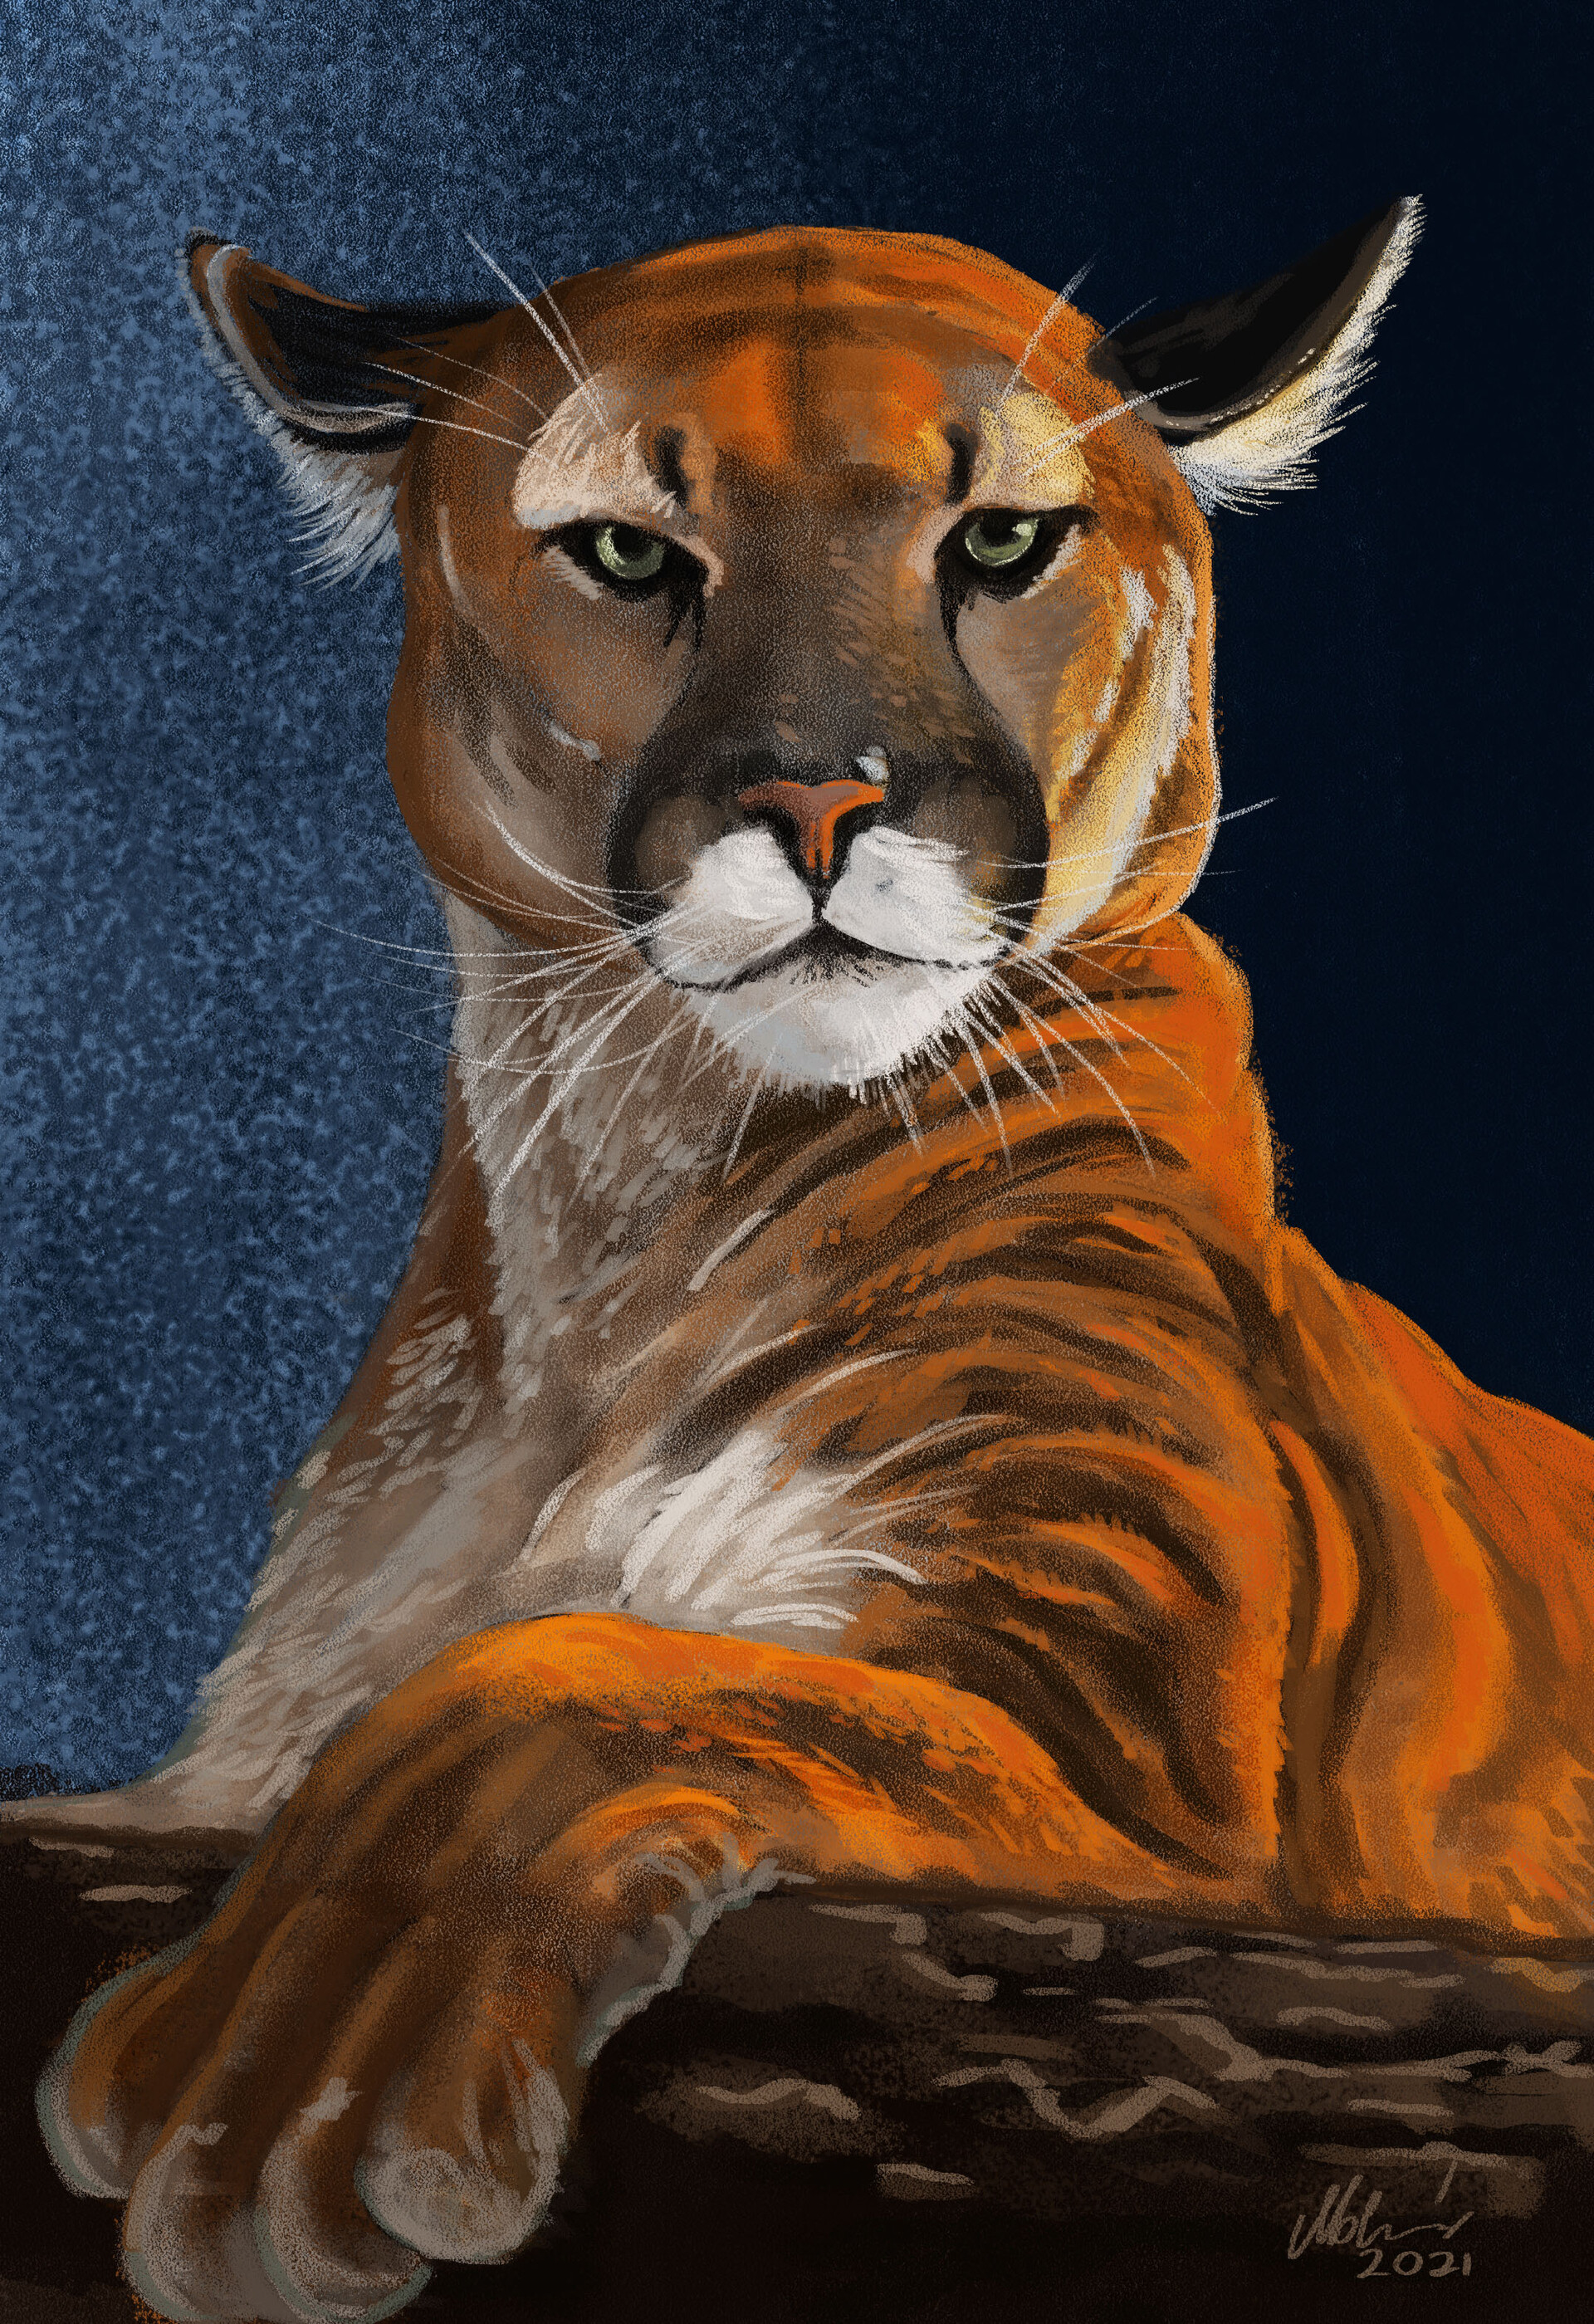 - Puma painting with more use opaque pixel and stronger colors